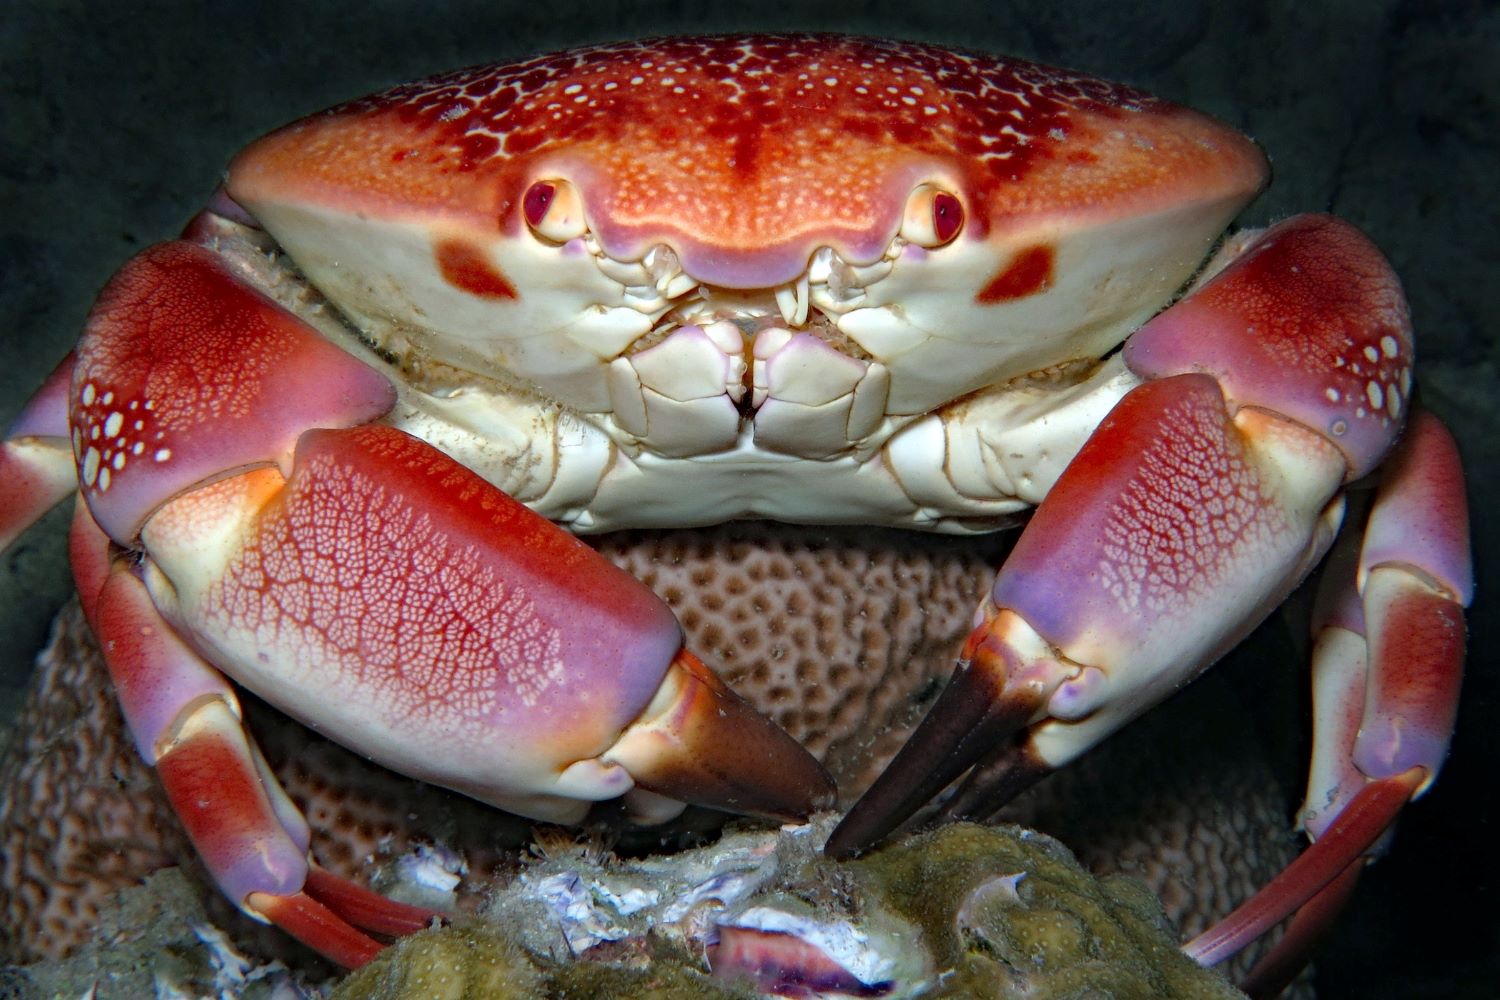 Unbelievable Results: Teaching Crabs To Read Leads To Unexpected Consequences